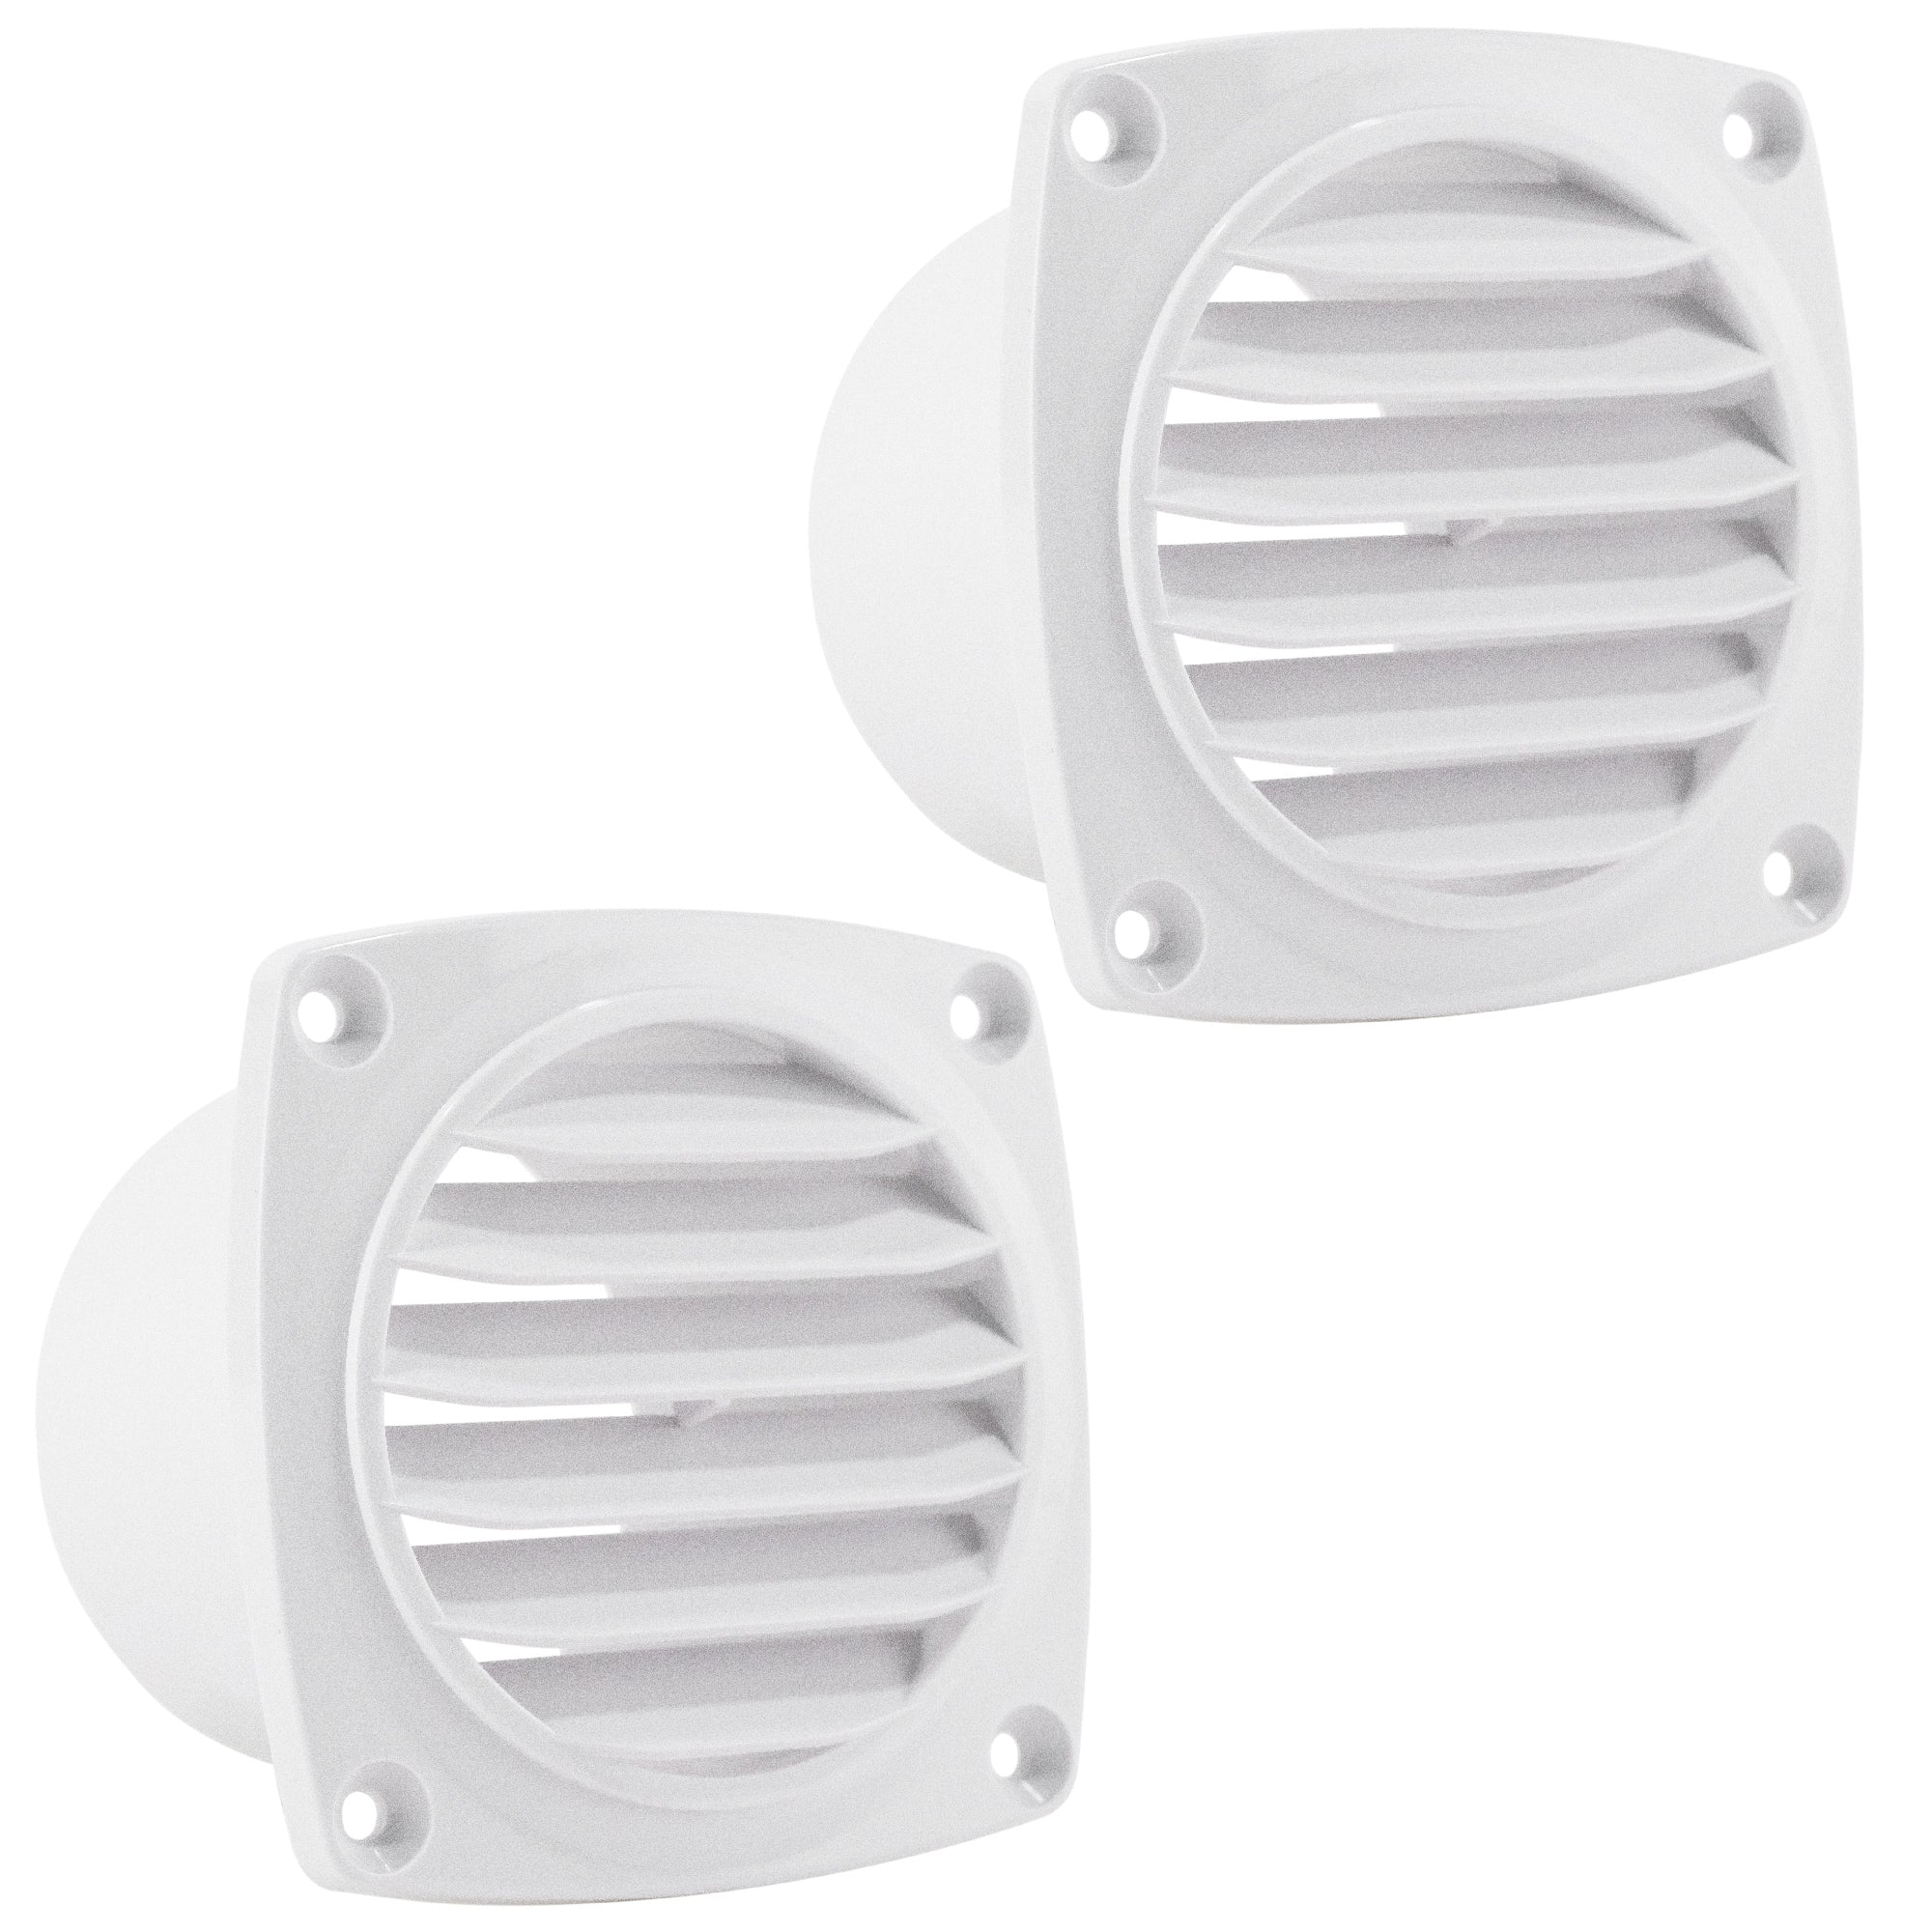 6-Slotted Louvered Hose Vent, 3-inch Hose Diameter, White, 2-Pack - FO109-M2